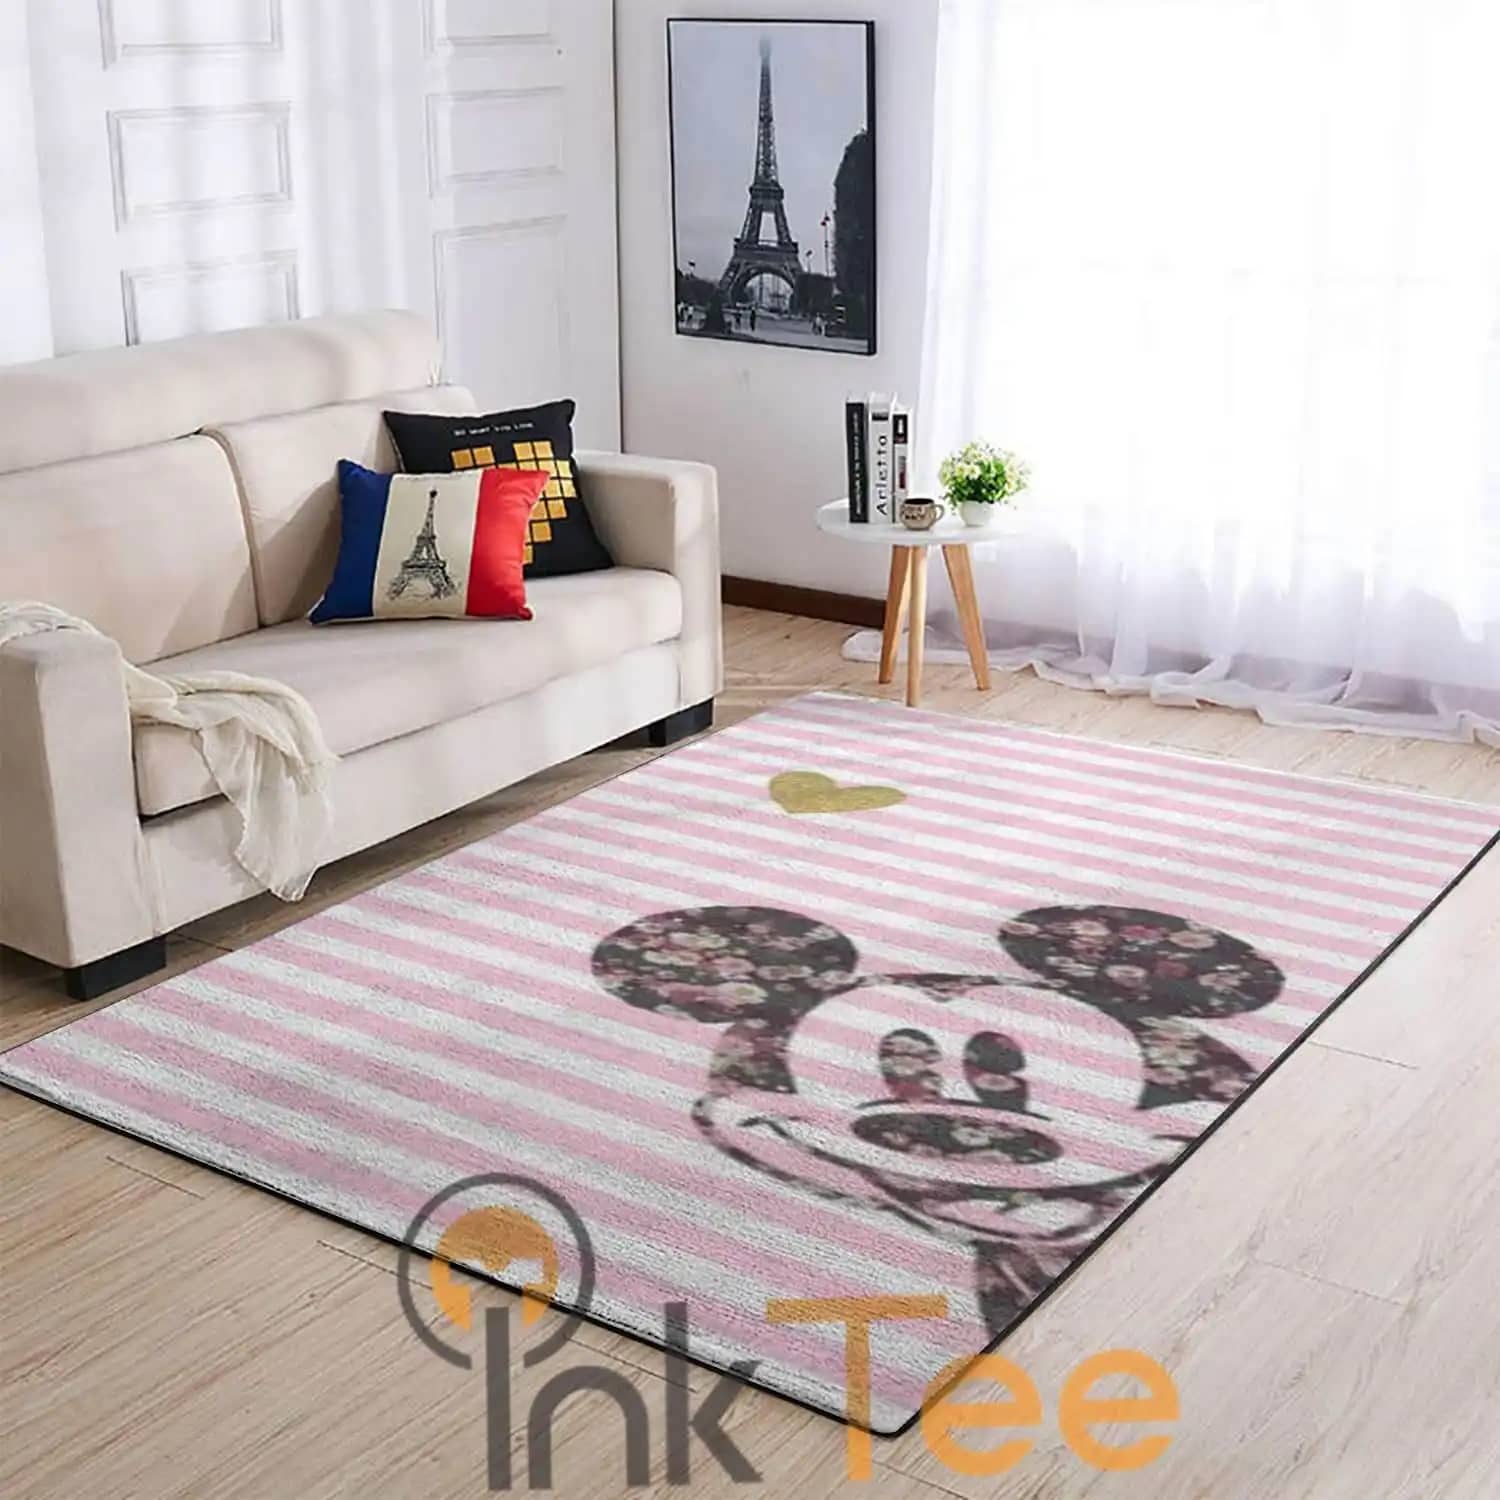 Funny Mickey Mouse Living Room Area Amazon Best Seller 4101 Rug